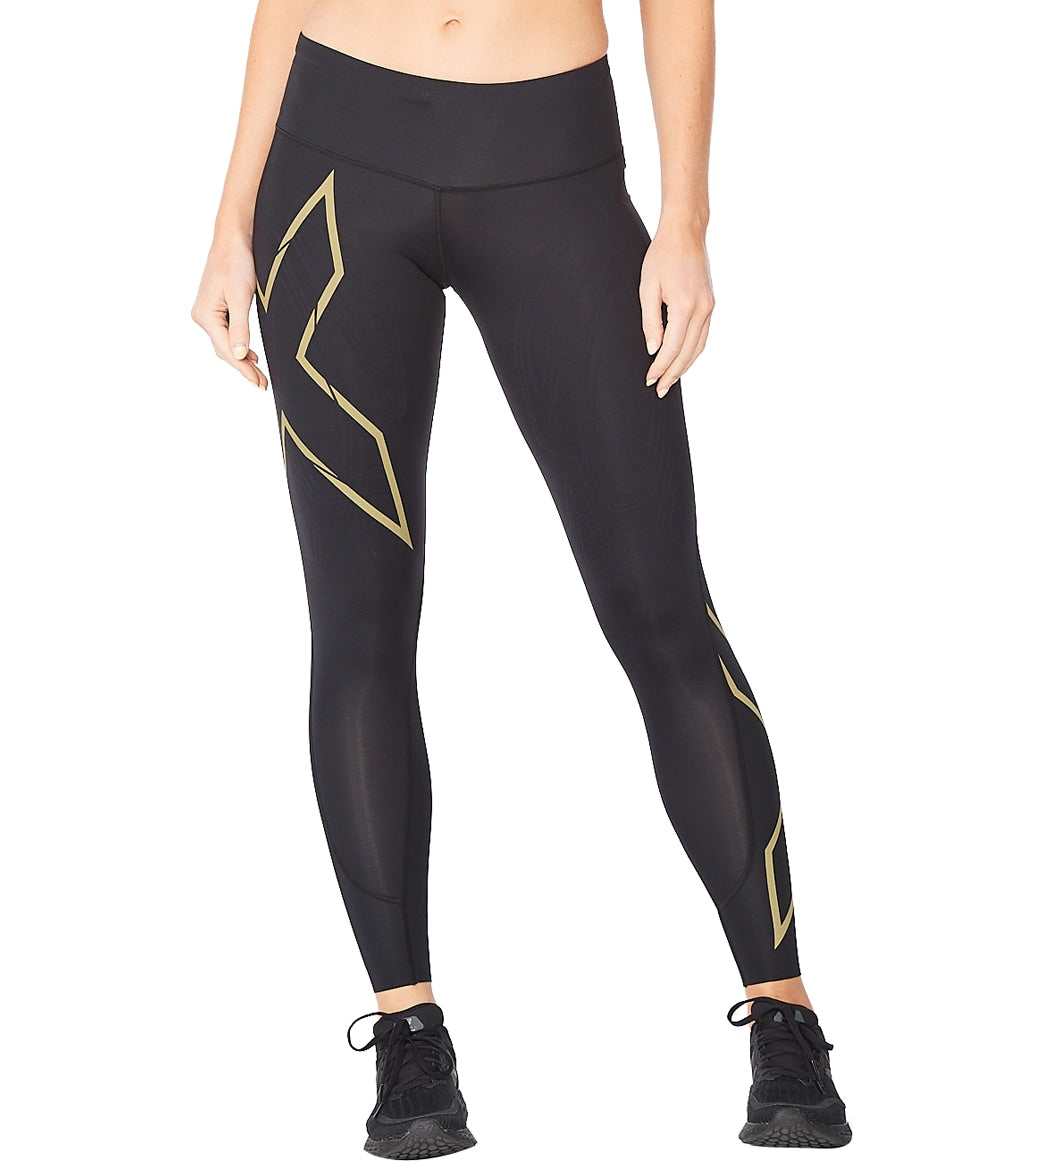 2XU Women's Light Speed Mid-Rise Compression Tight at SwimOutlet.com